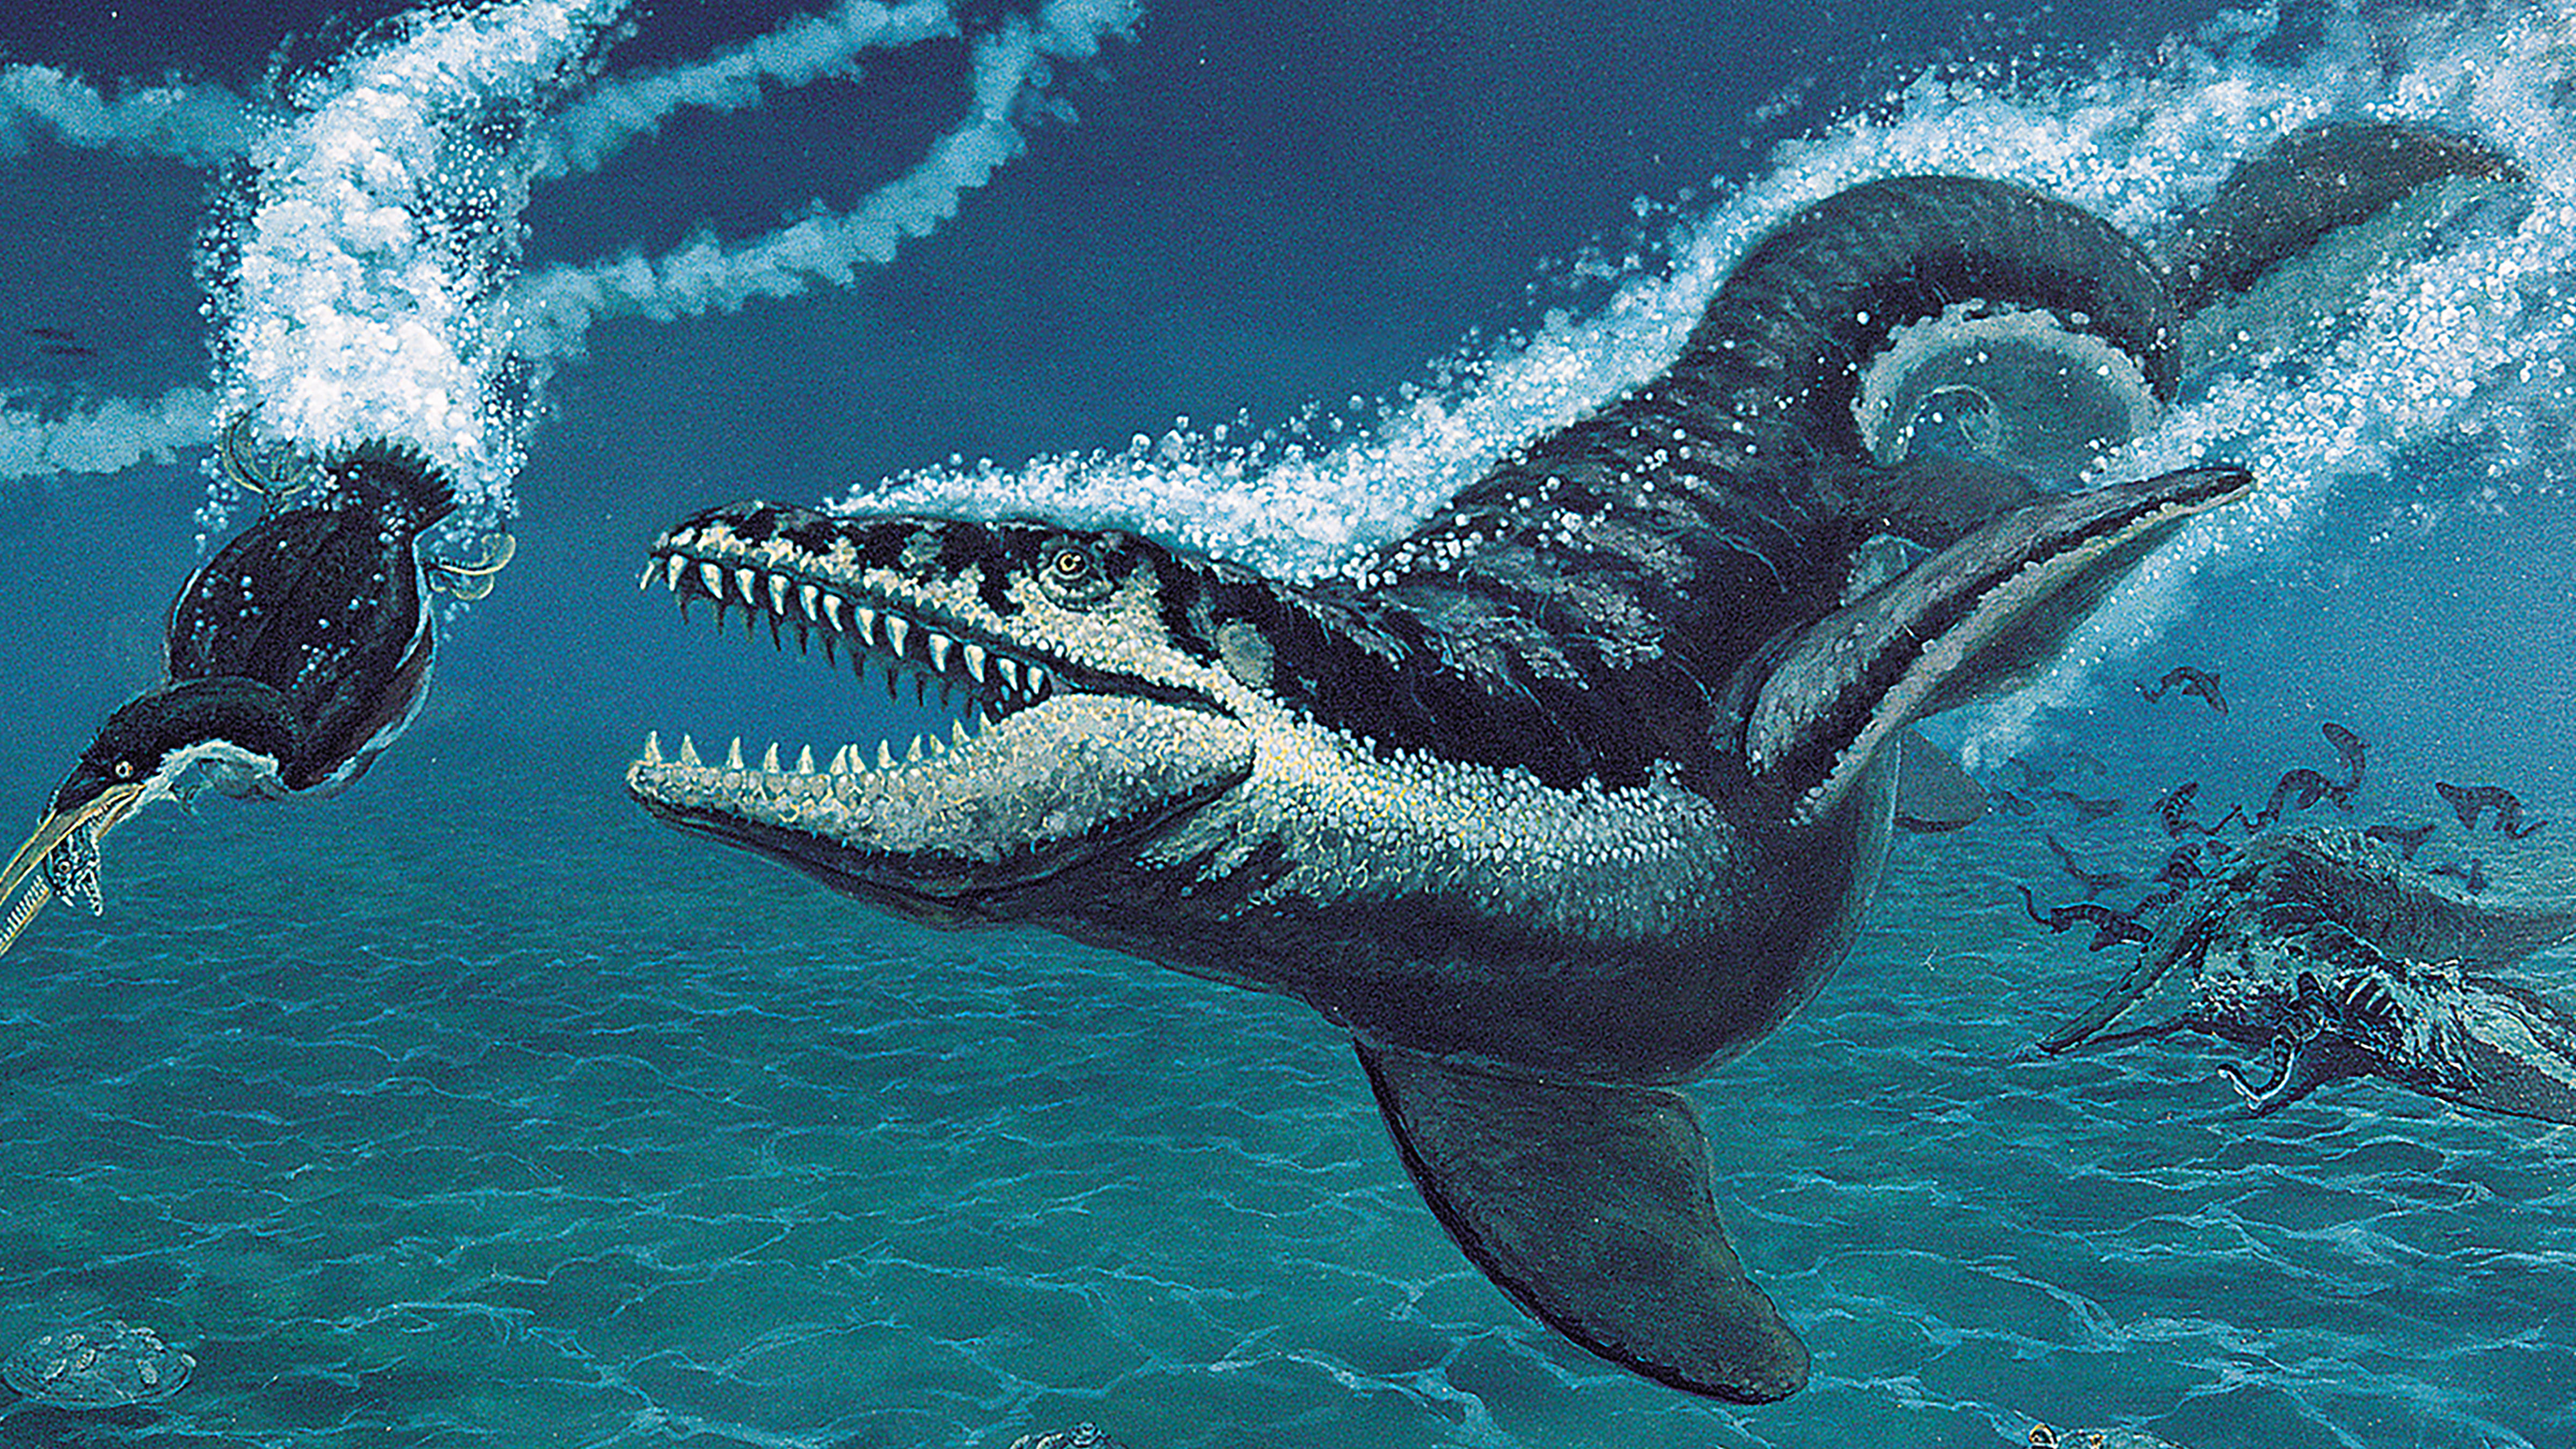 North Dakota fossils could be new species of ancient marine reptile - CBS News